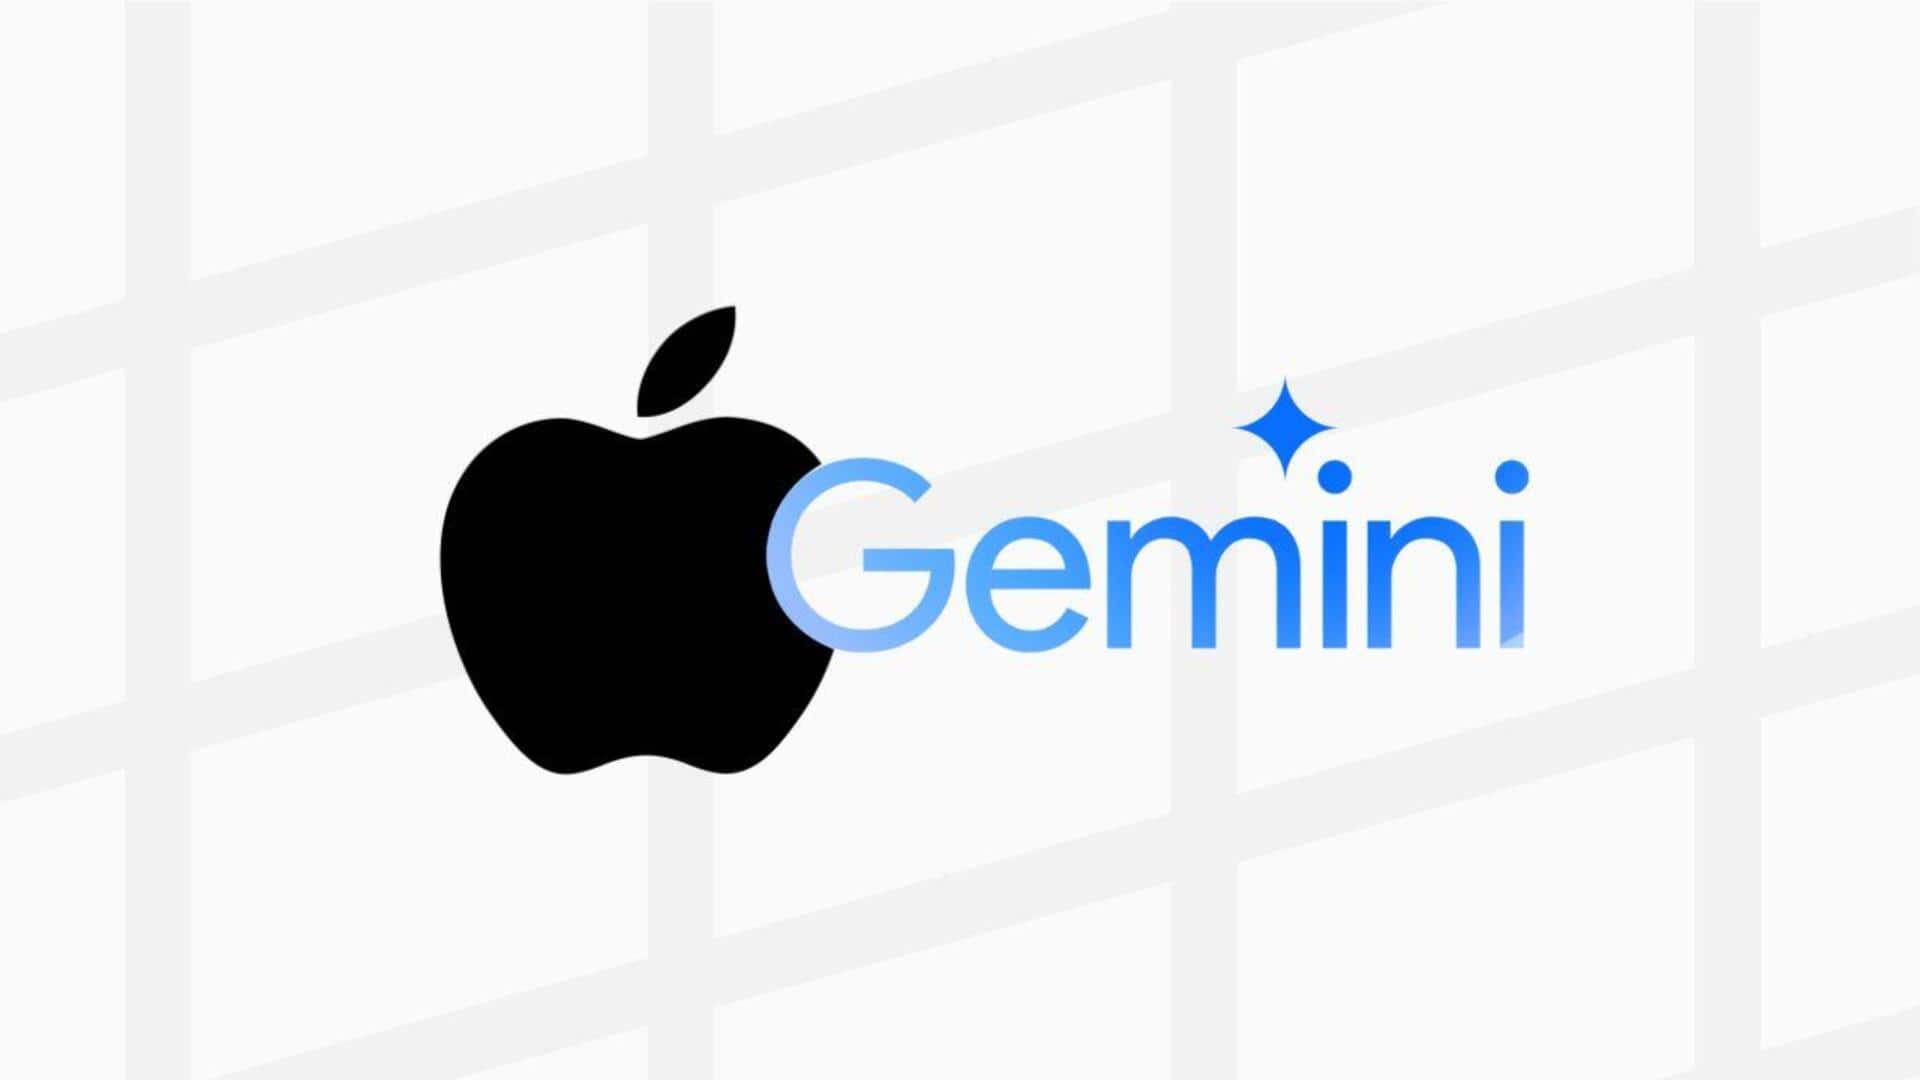 Google's Gemini AI could soon be integrated into Apple products